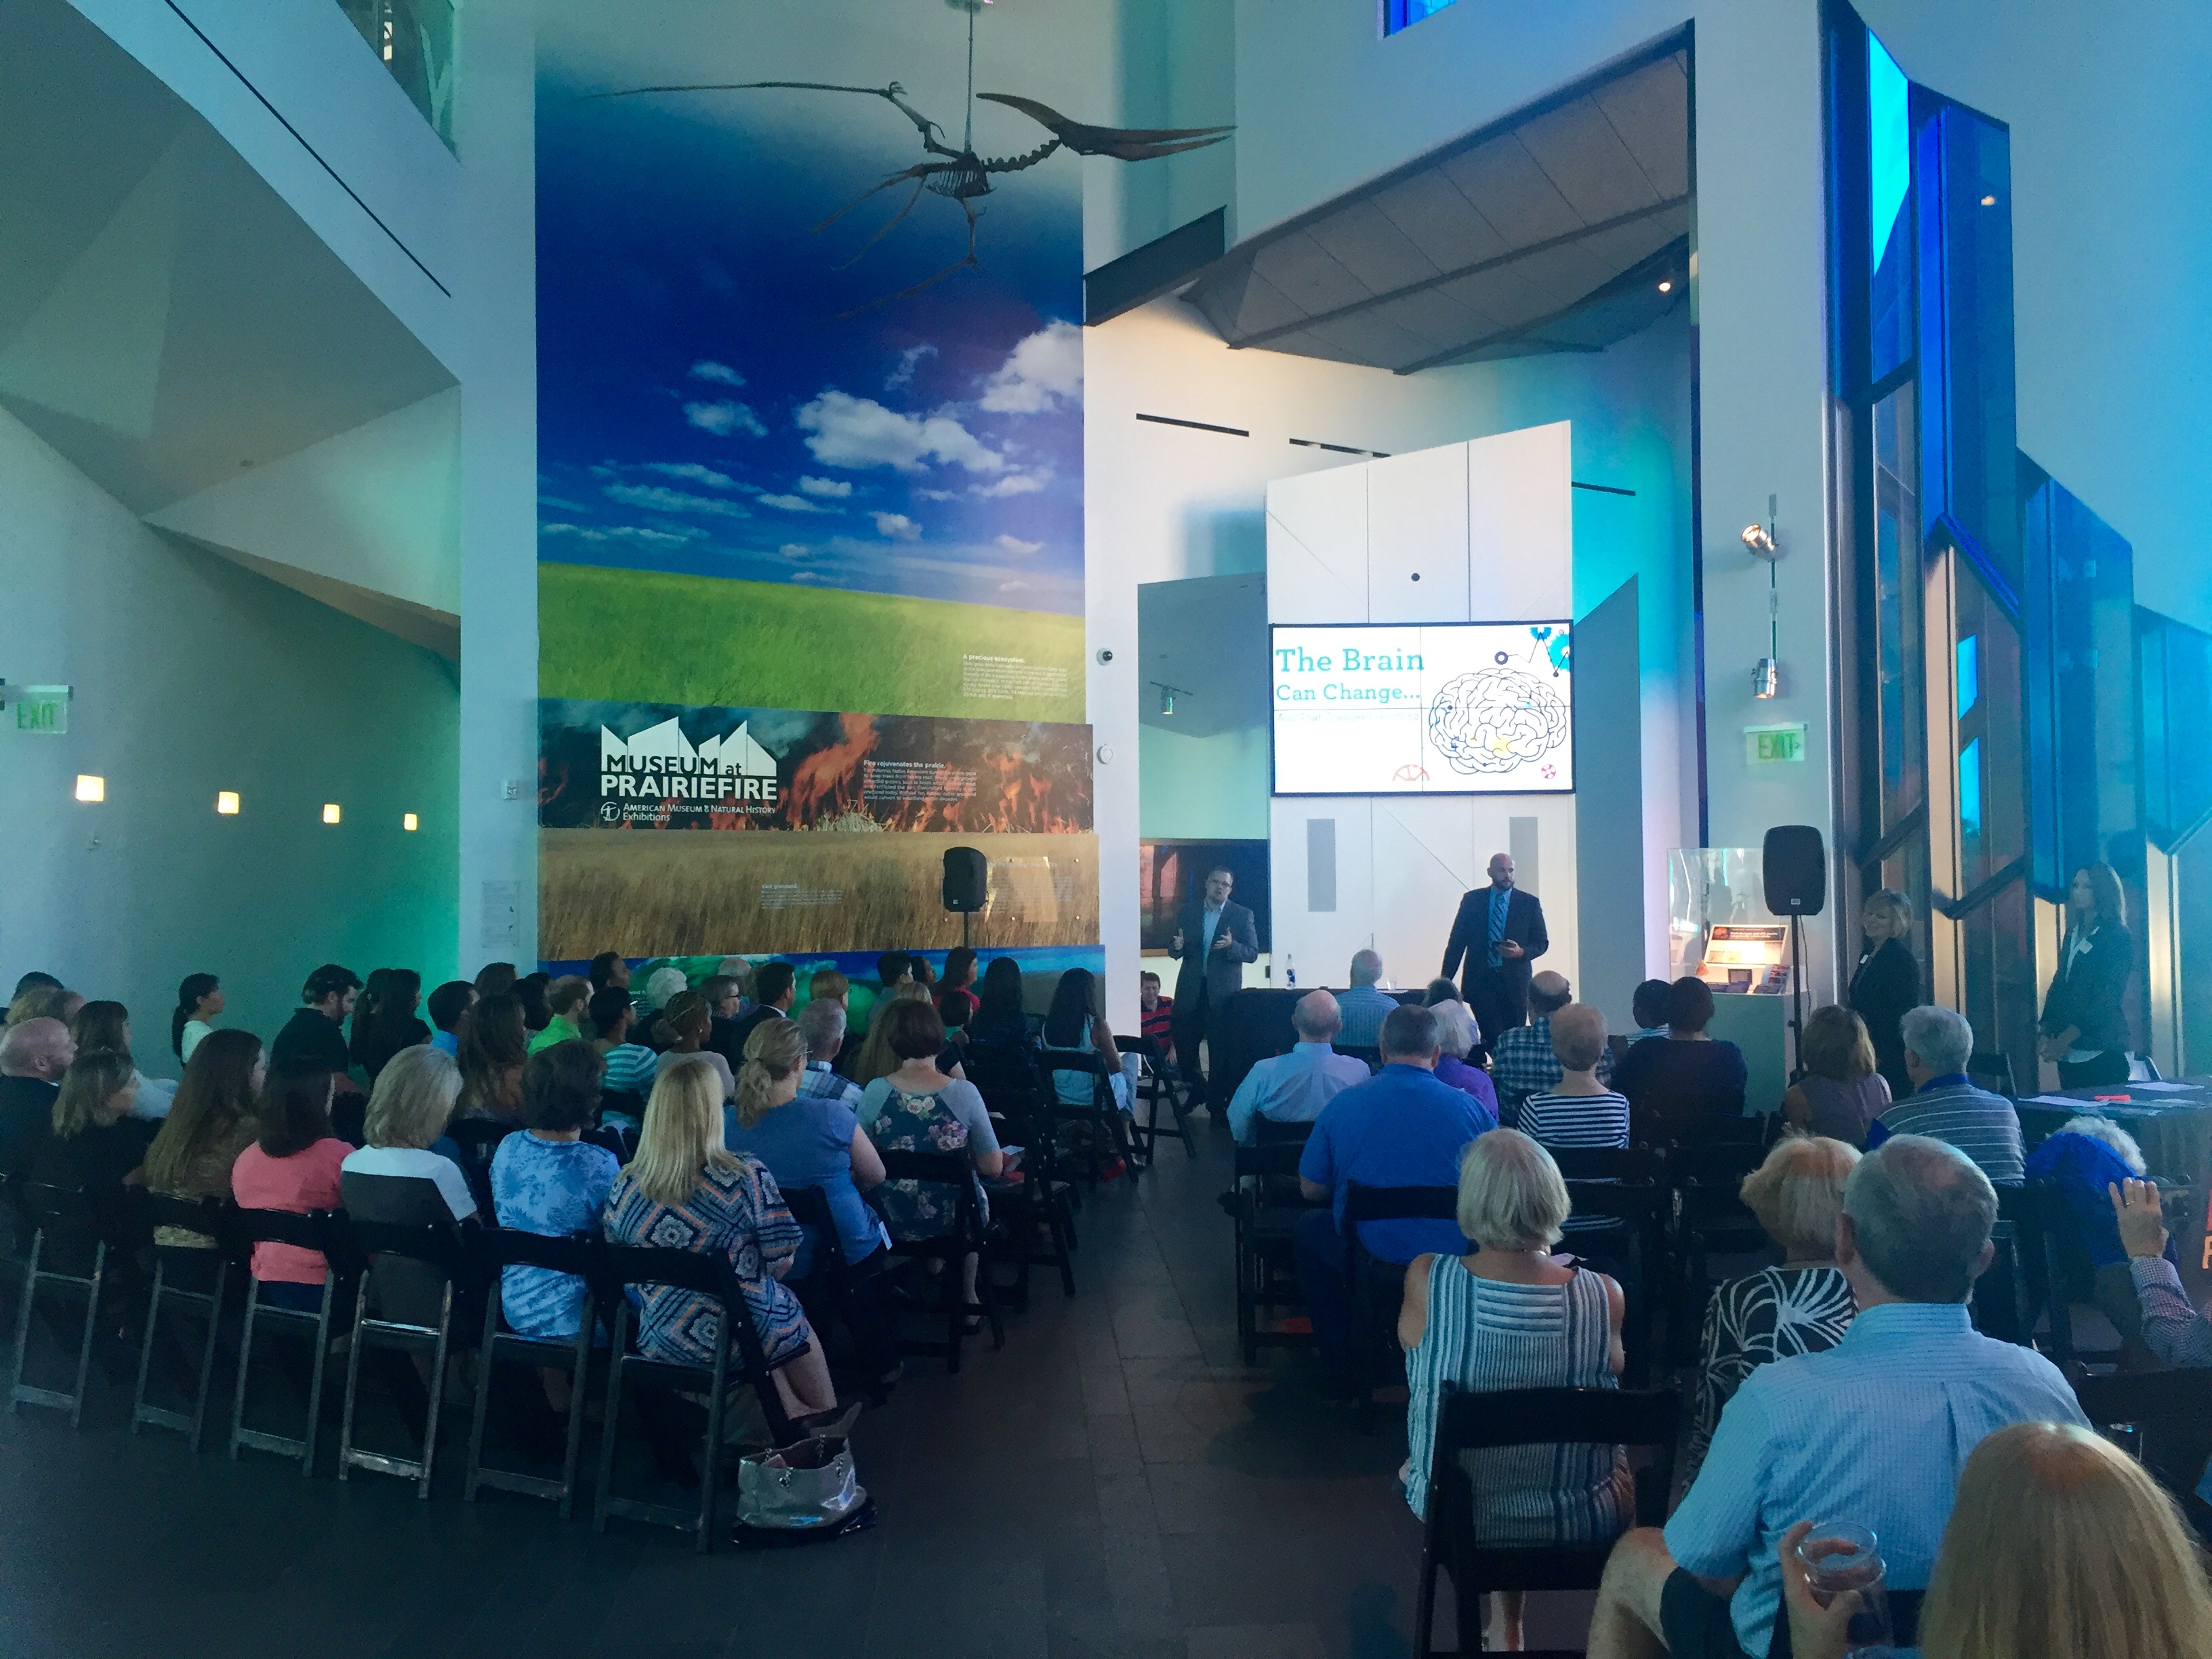 KVC Prairie Ridge Hospitals staff shares on link between adversity and resilience at Museum at Prairiefire Science Happy Hour